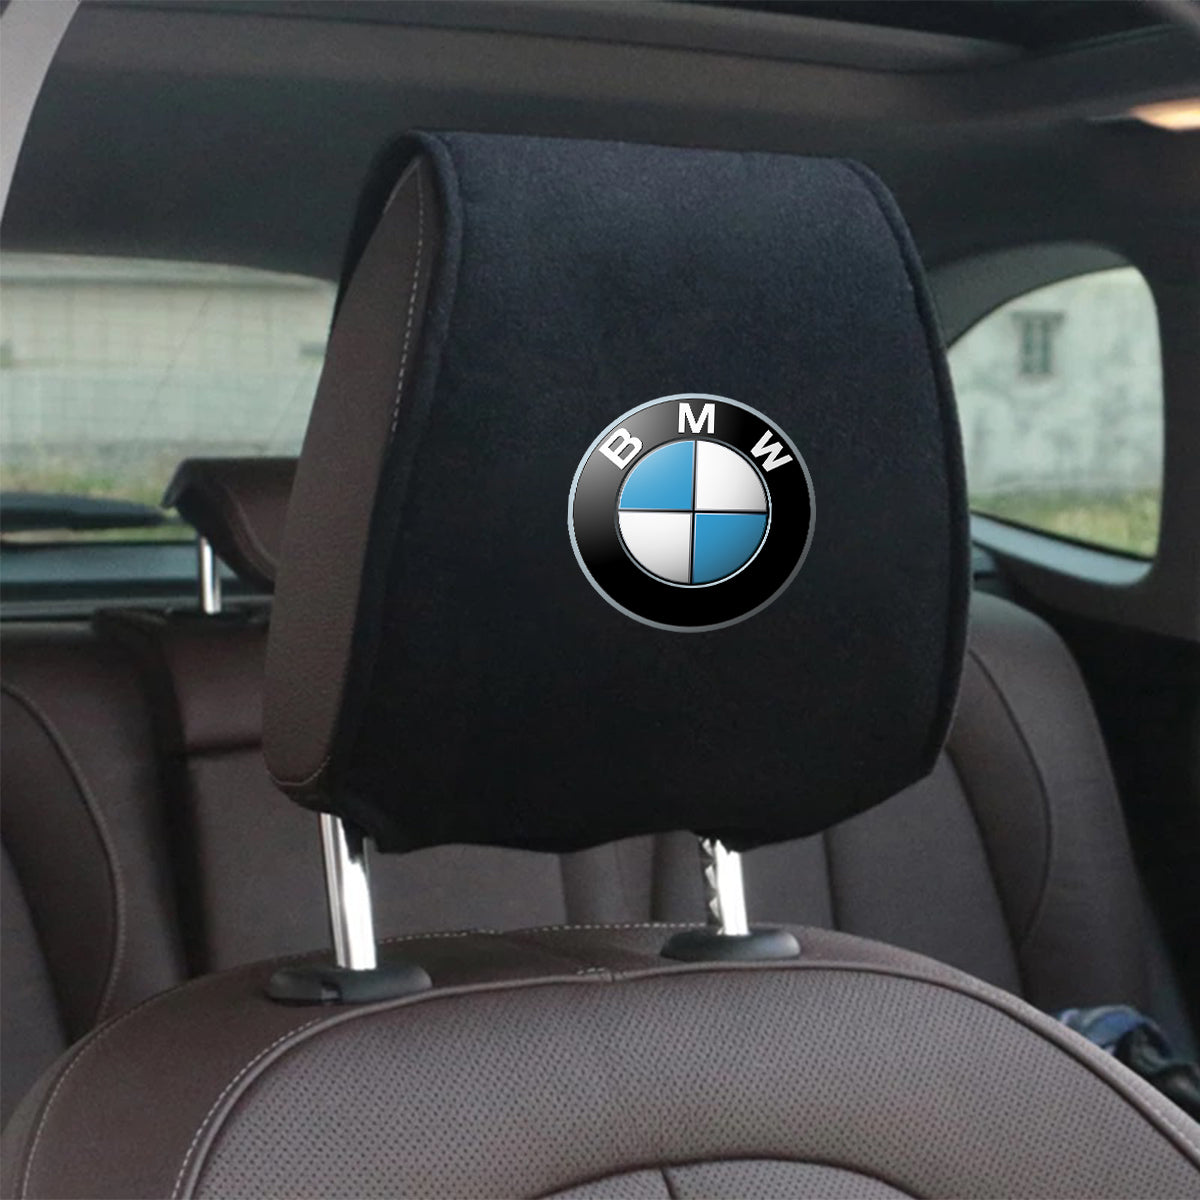 BMW Car Seat Headrest Cover: Stylish Protection for Your Vehicle's Headrests